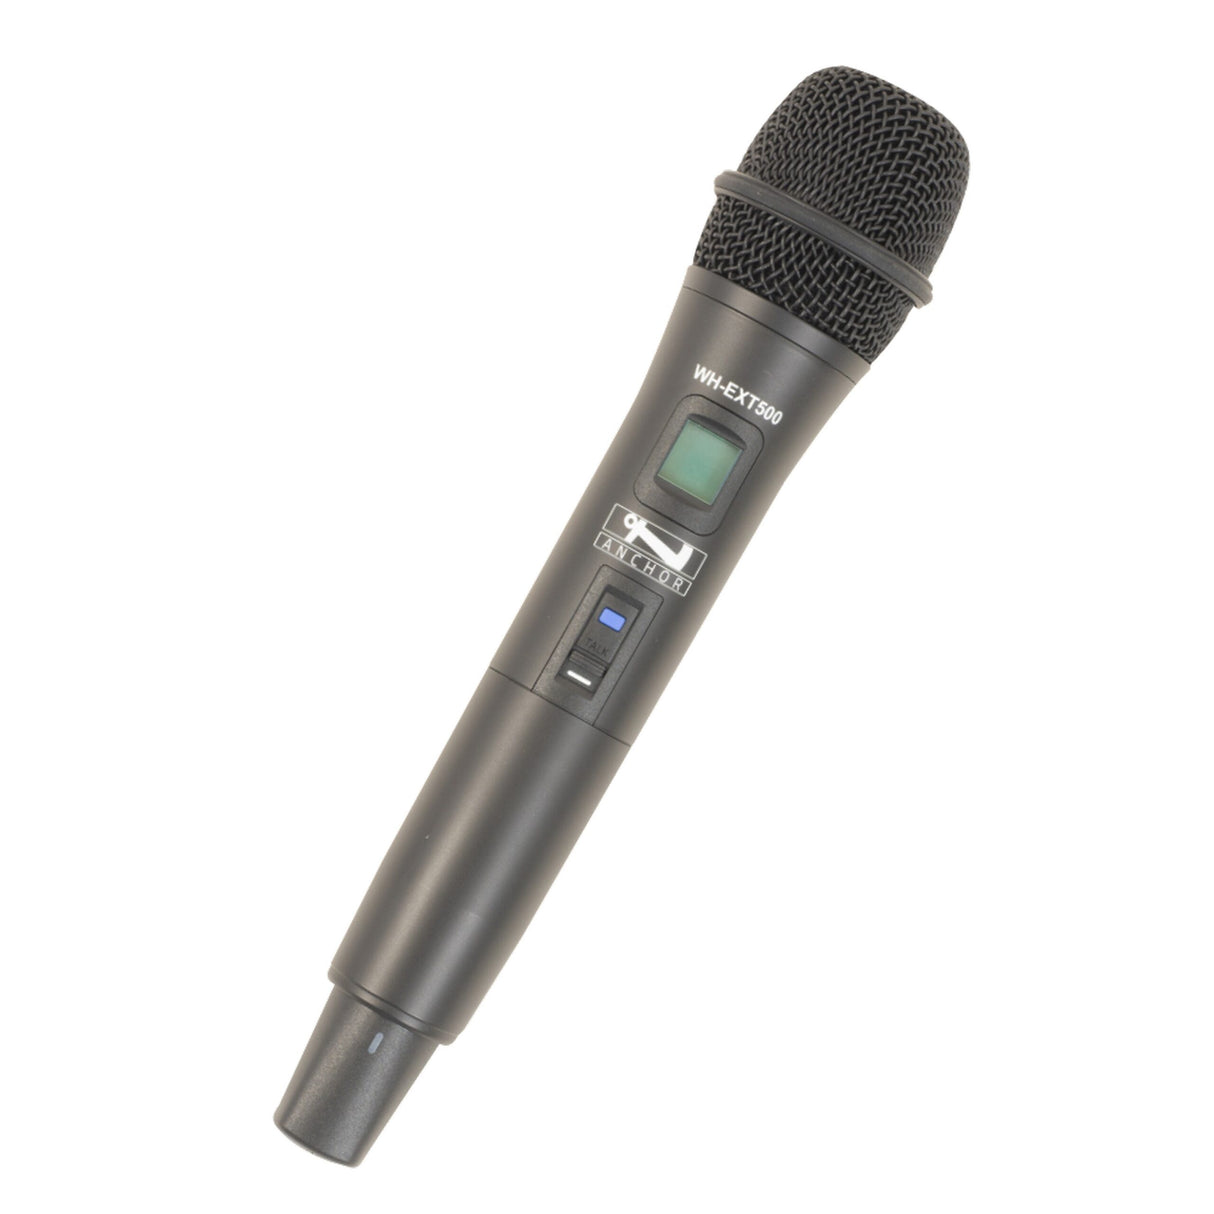 Anchor Audio WH-EXT500 Wireless Handheld Microphone Transmitter for UHF-EXT500 Series